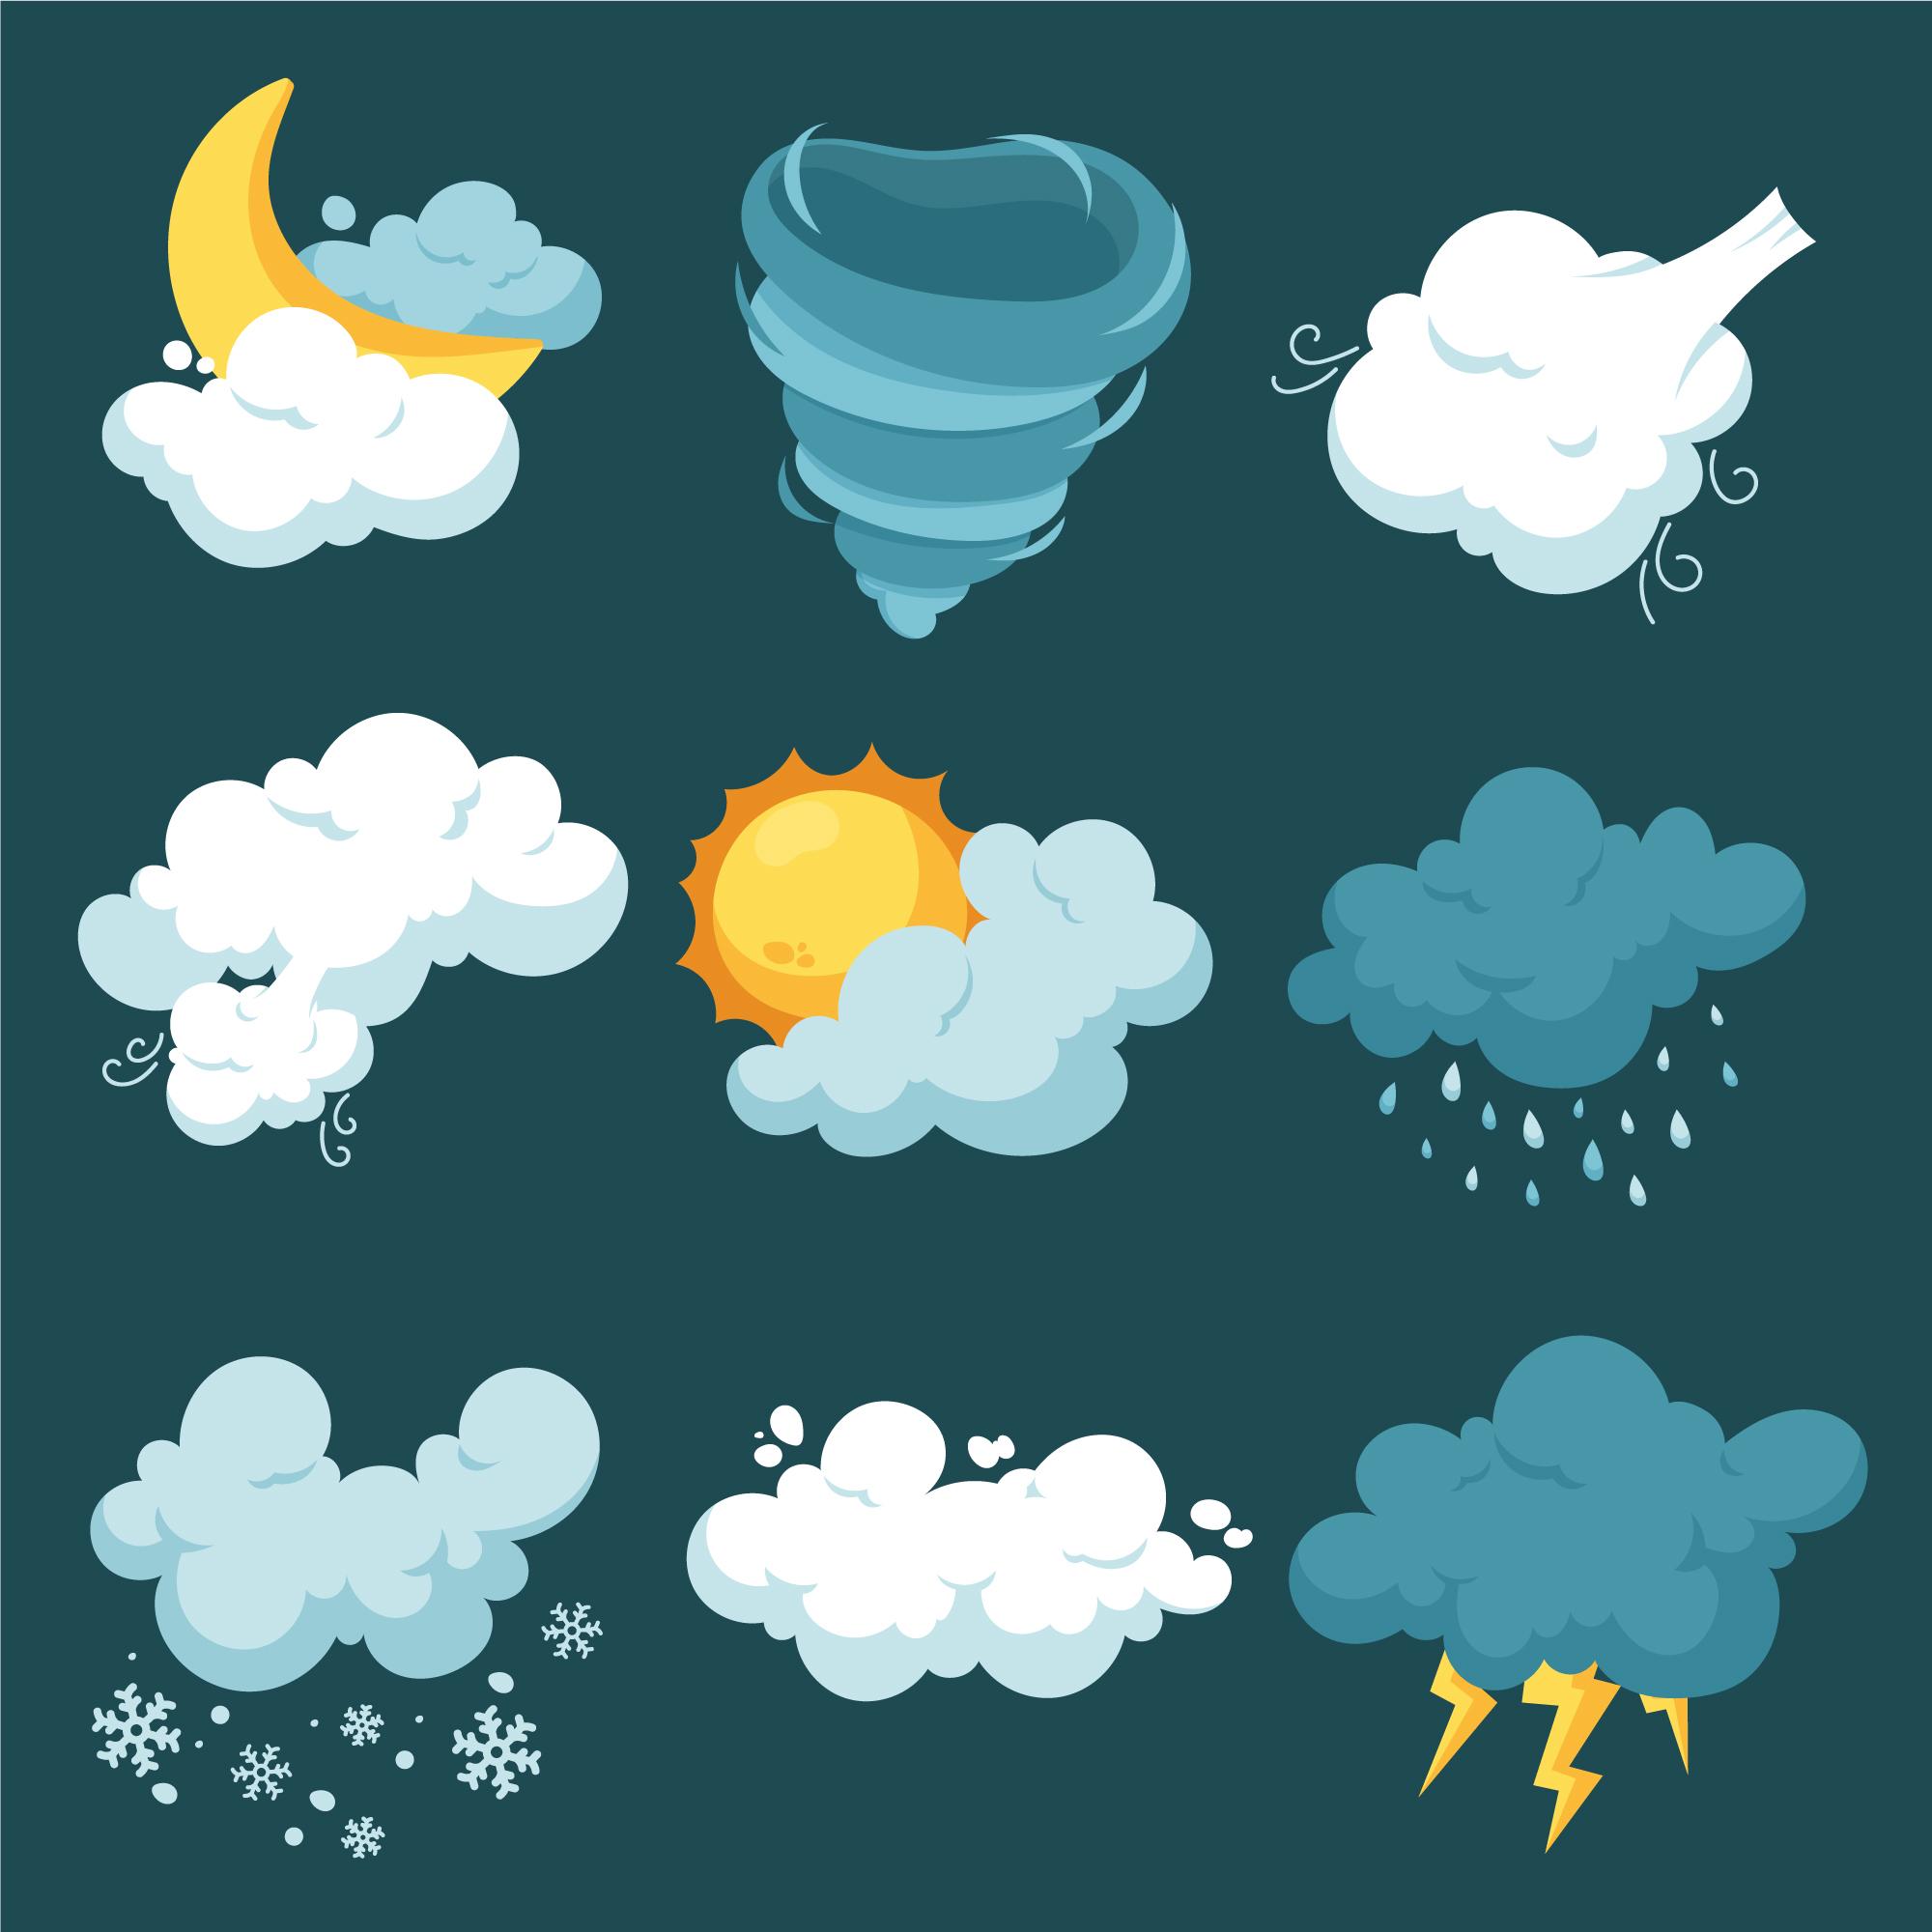 A picture showing different types of weather